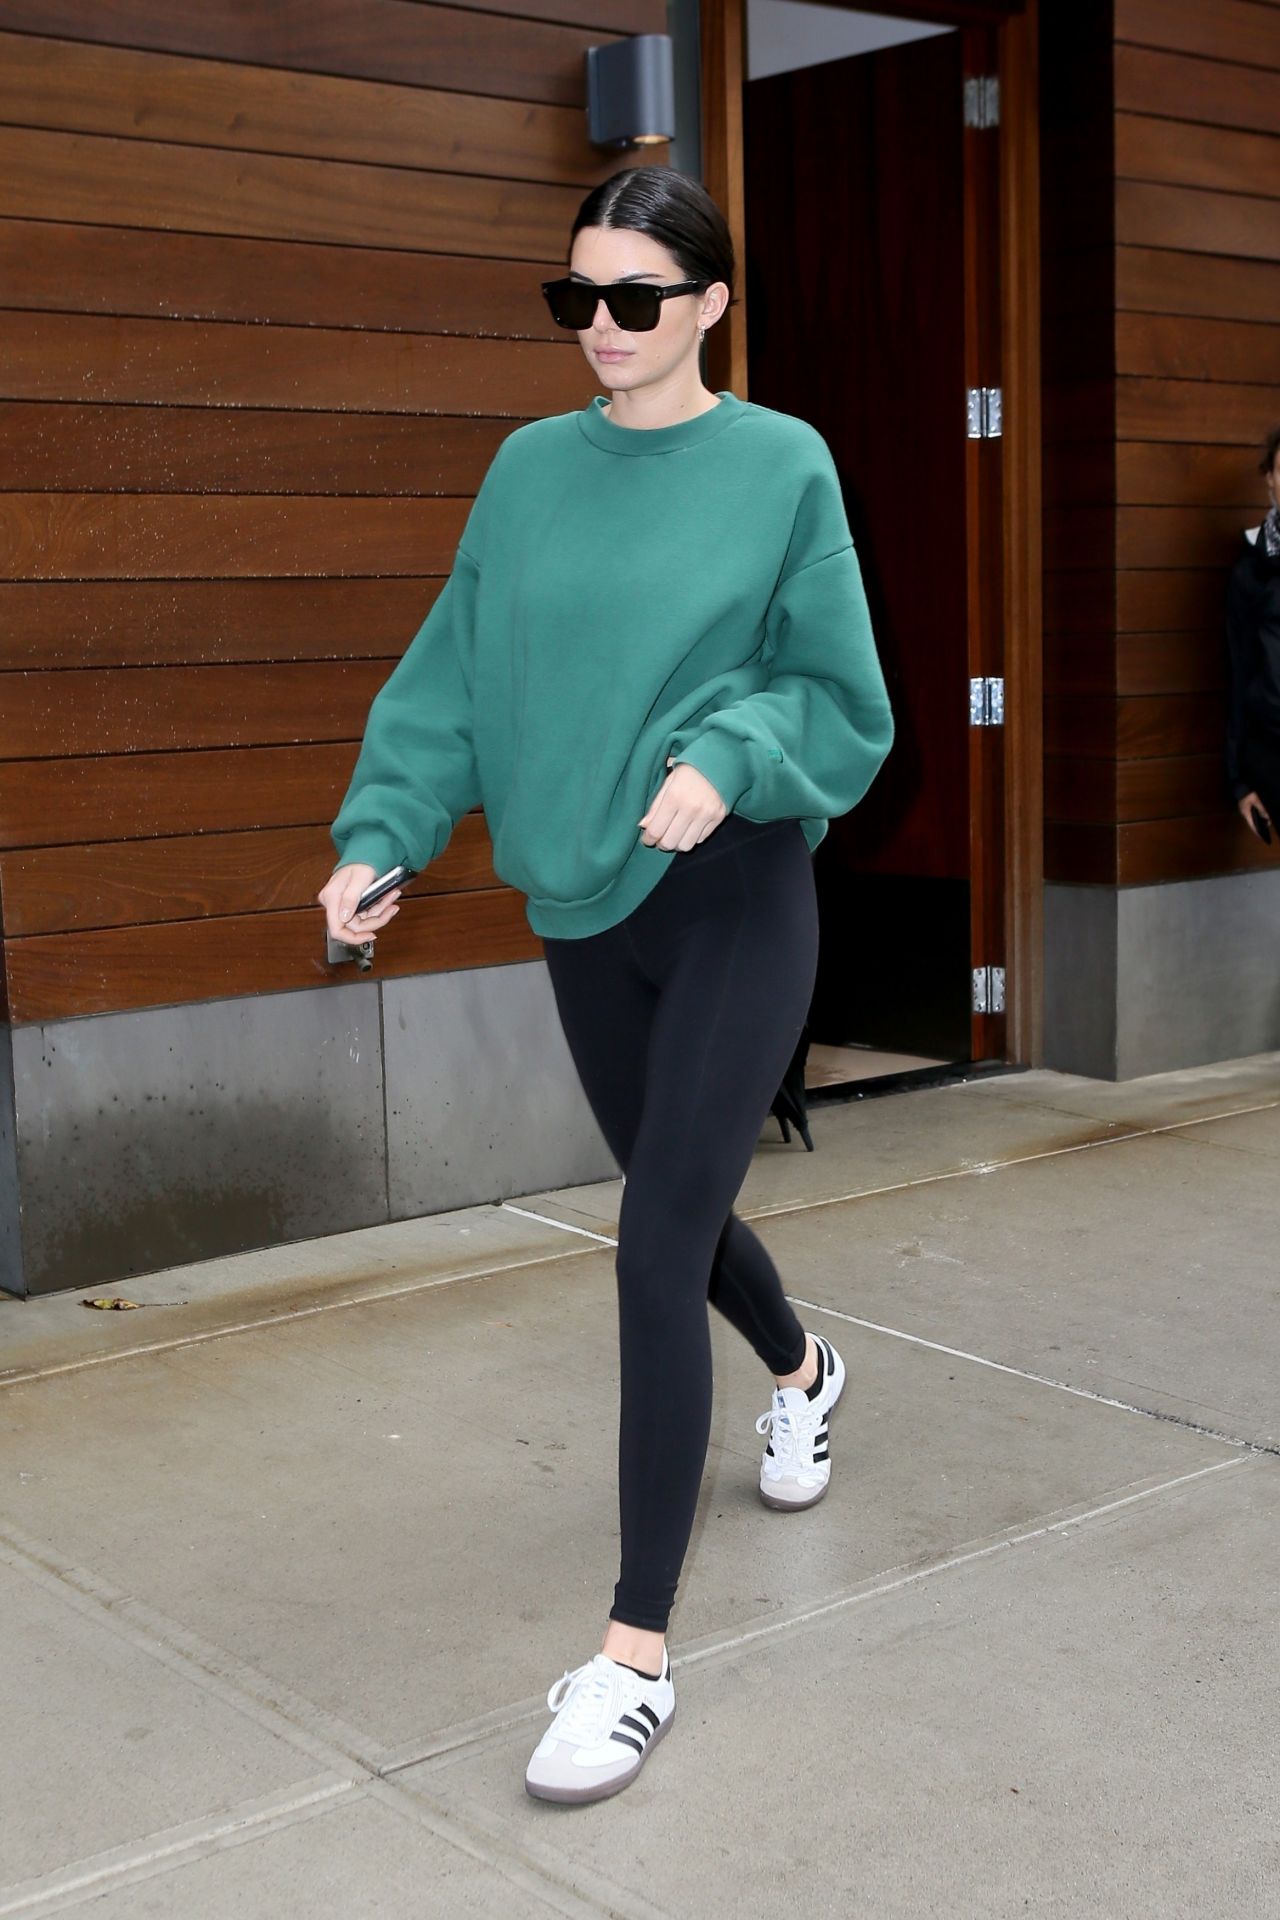 Kendall Jenner - Wearing Black Leggings and a Green Sweatshirt in NYC ...